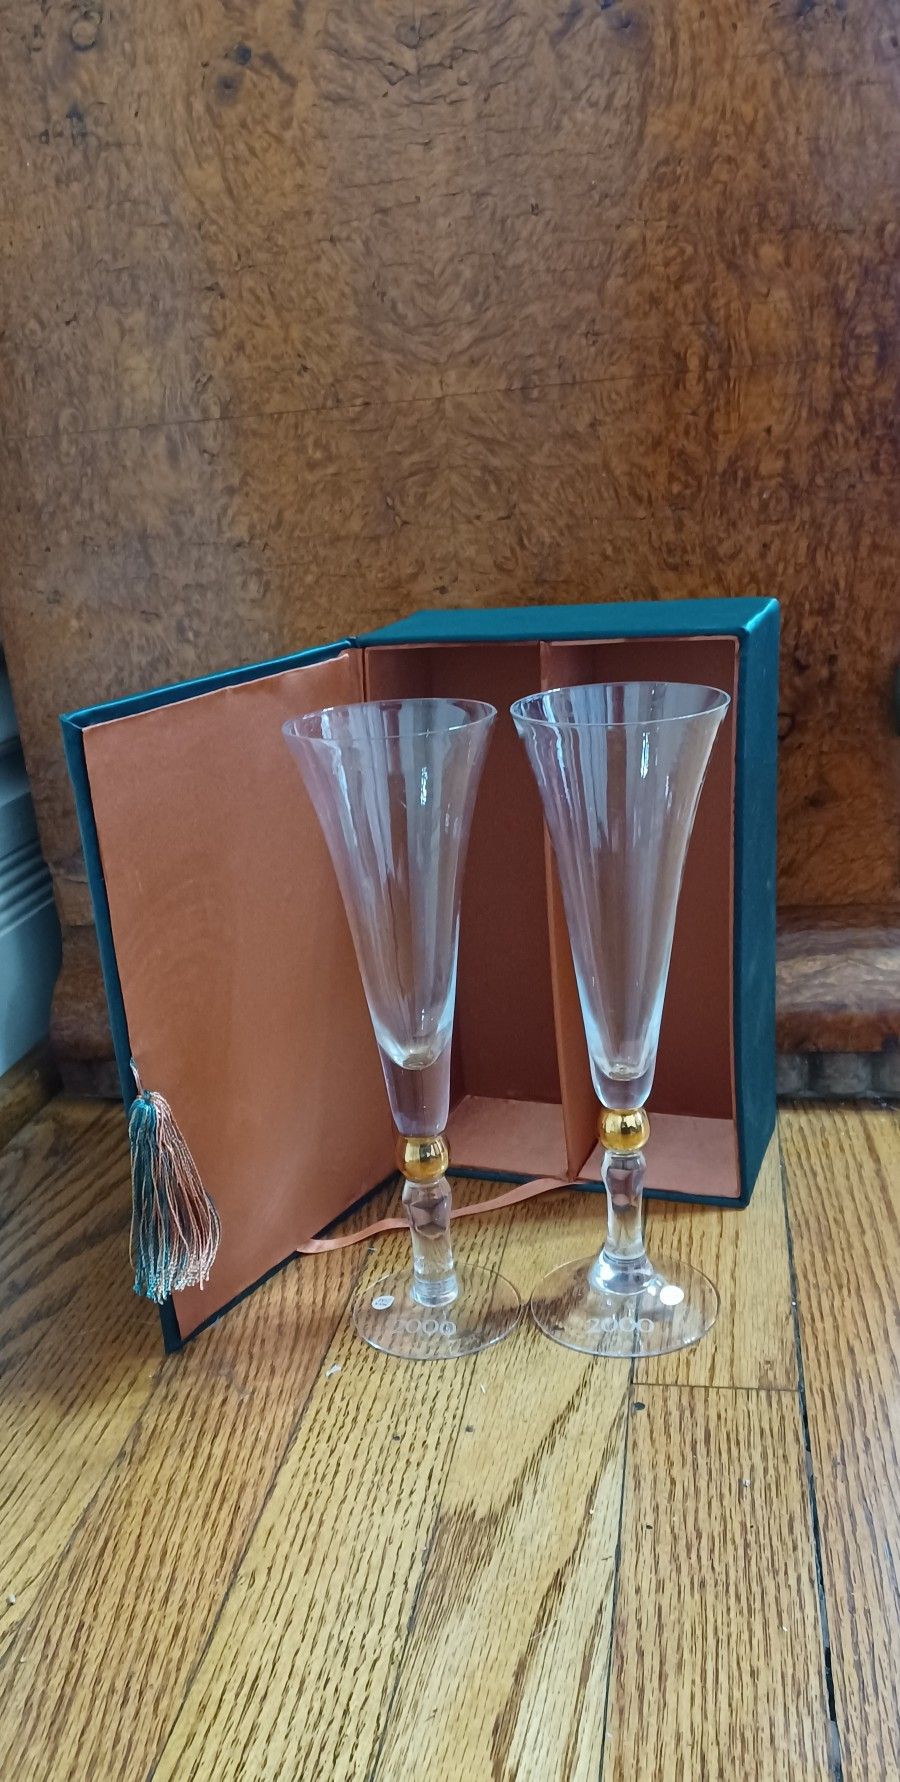 Champagne Flutes, Set Of 2 With Year 2000 Printed On Them With Gift Box